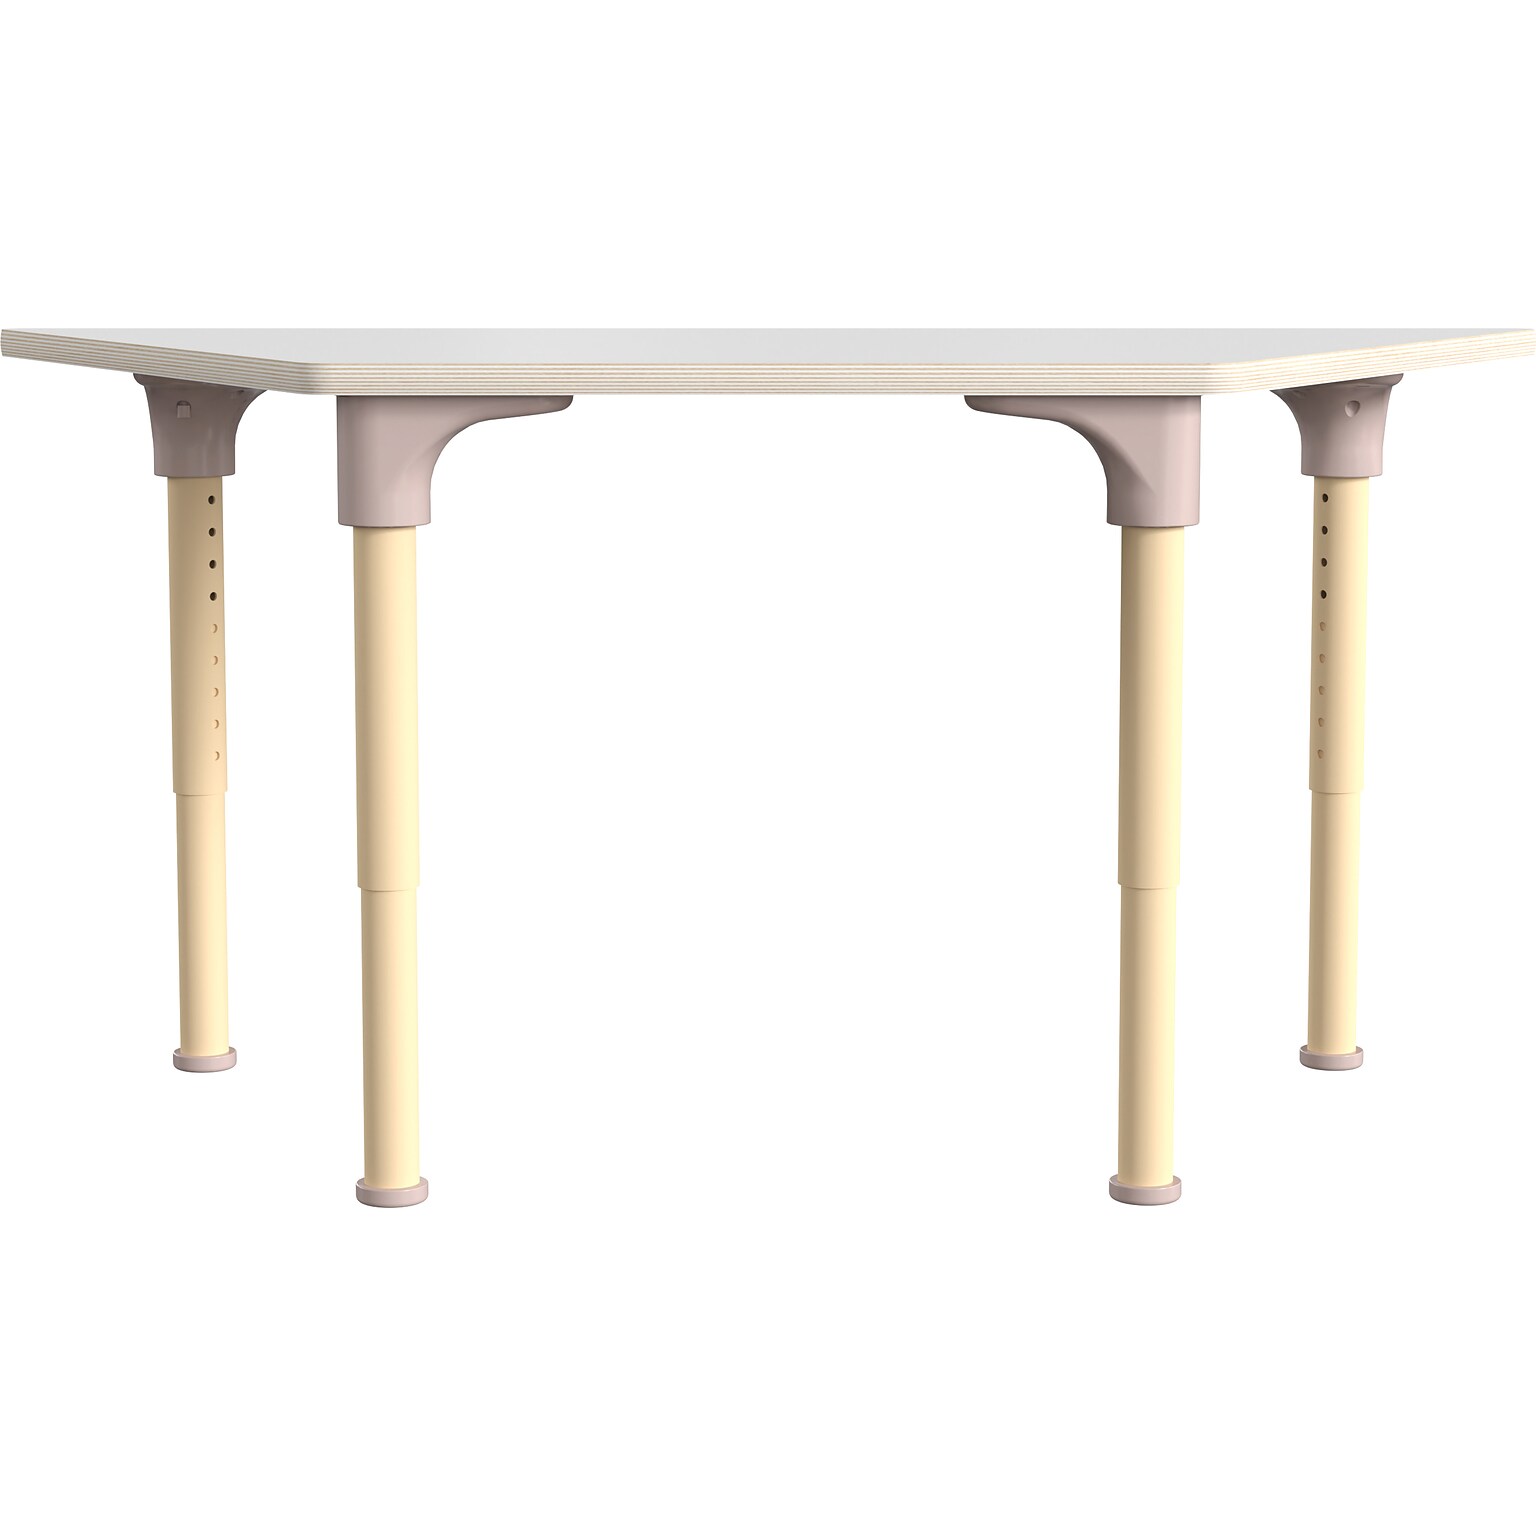 Flash Furniture Bright Beginnings Hercules Trapezoid Table, 47 x 20.75, Height Adjustable, Beech/White (MK-ME088028-GG)